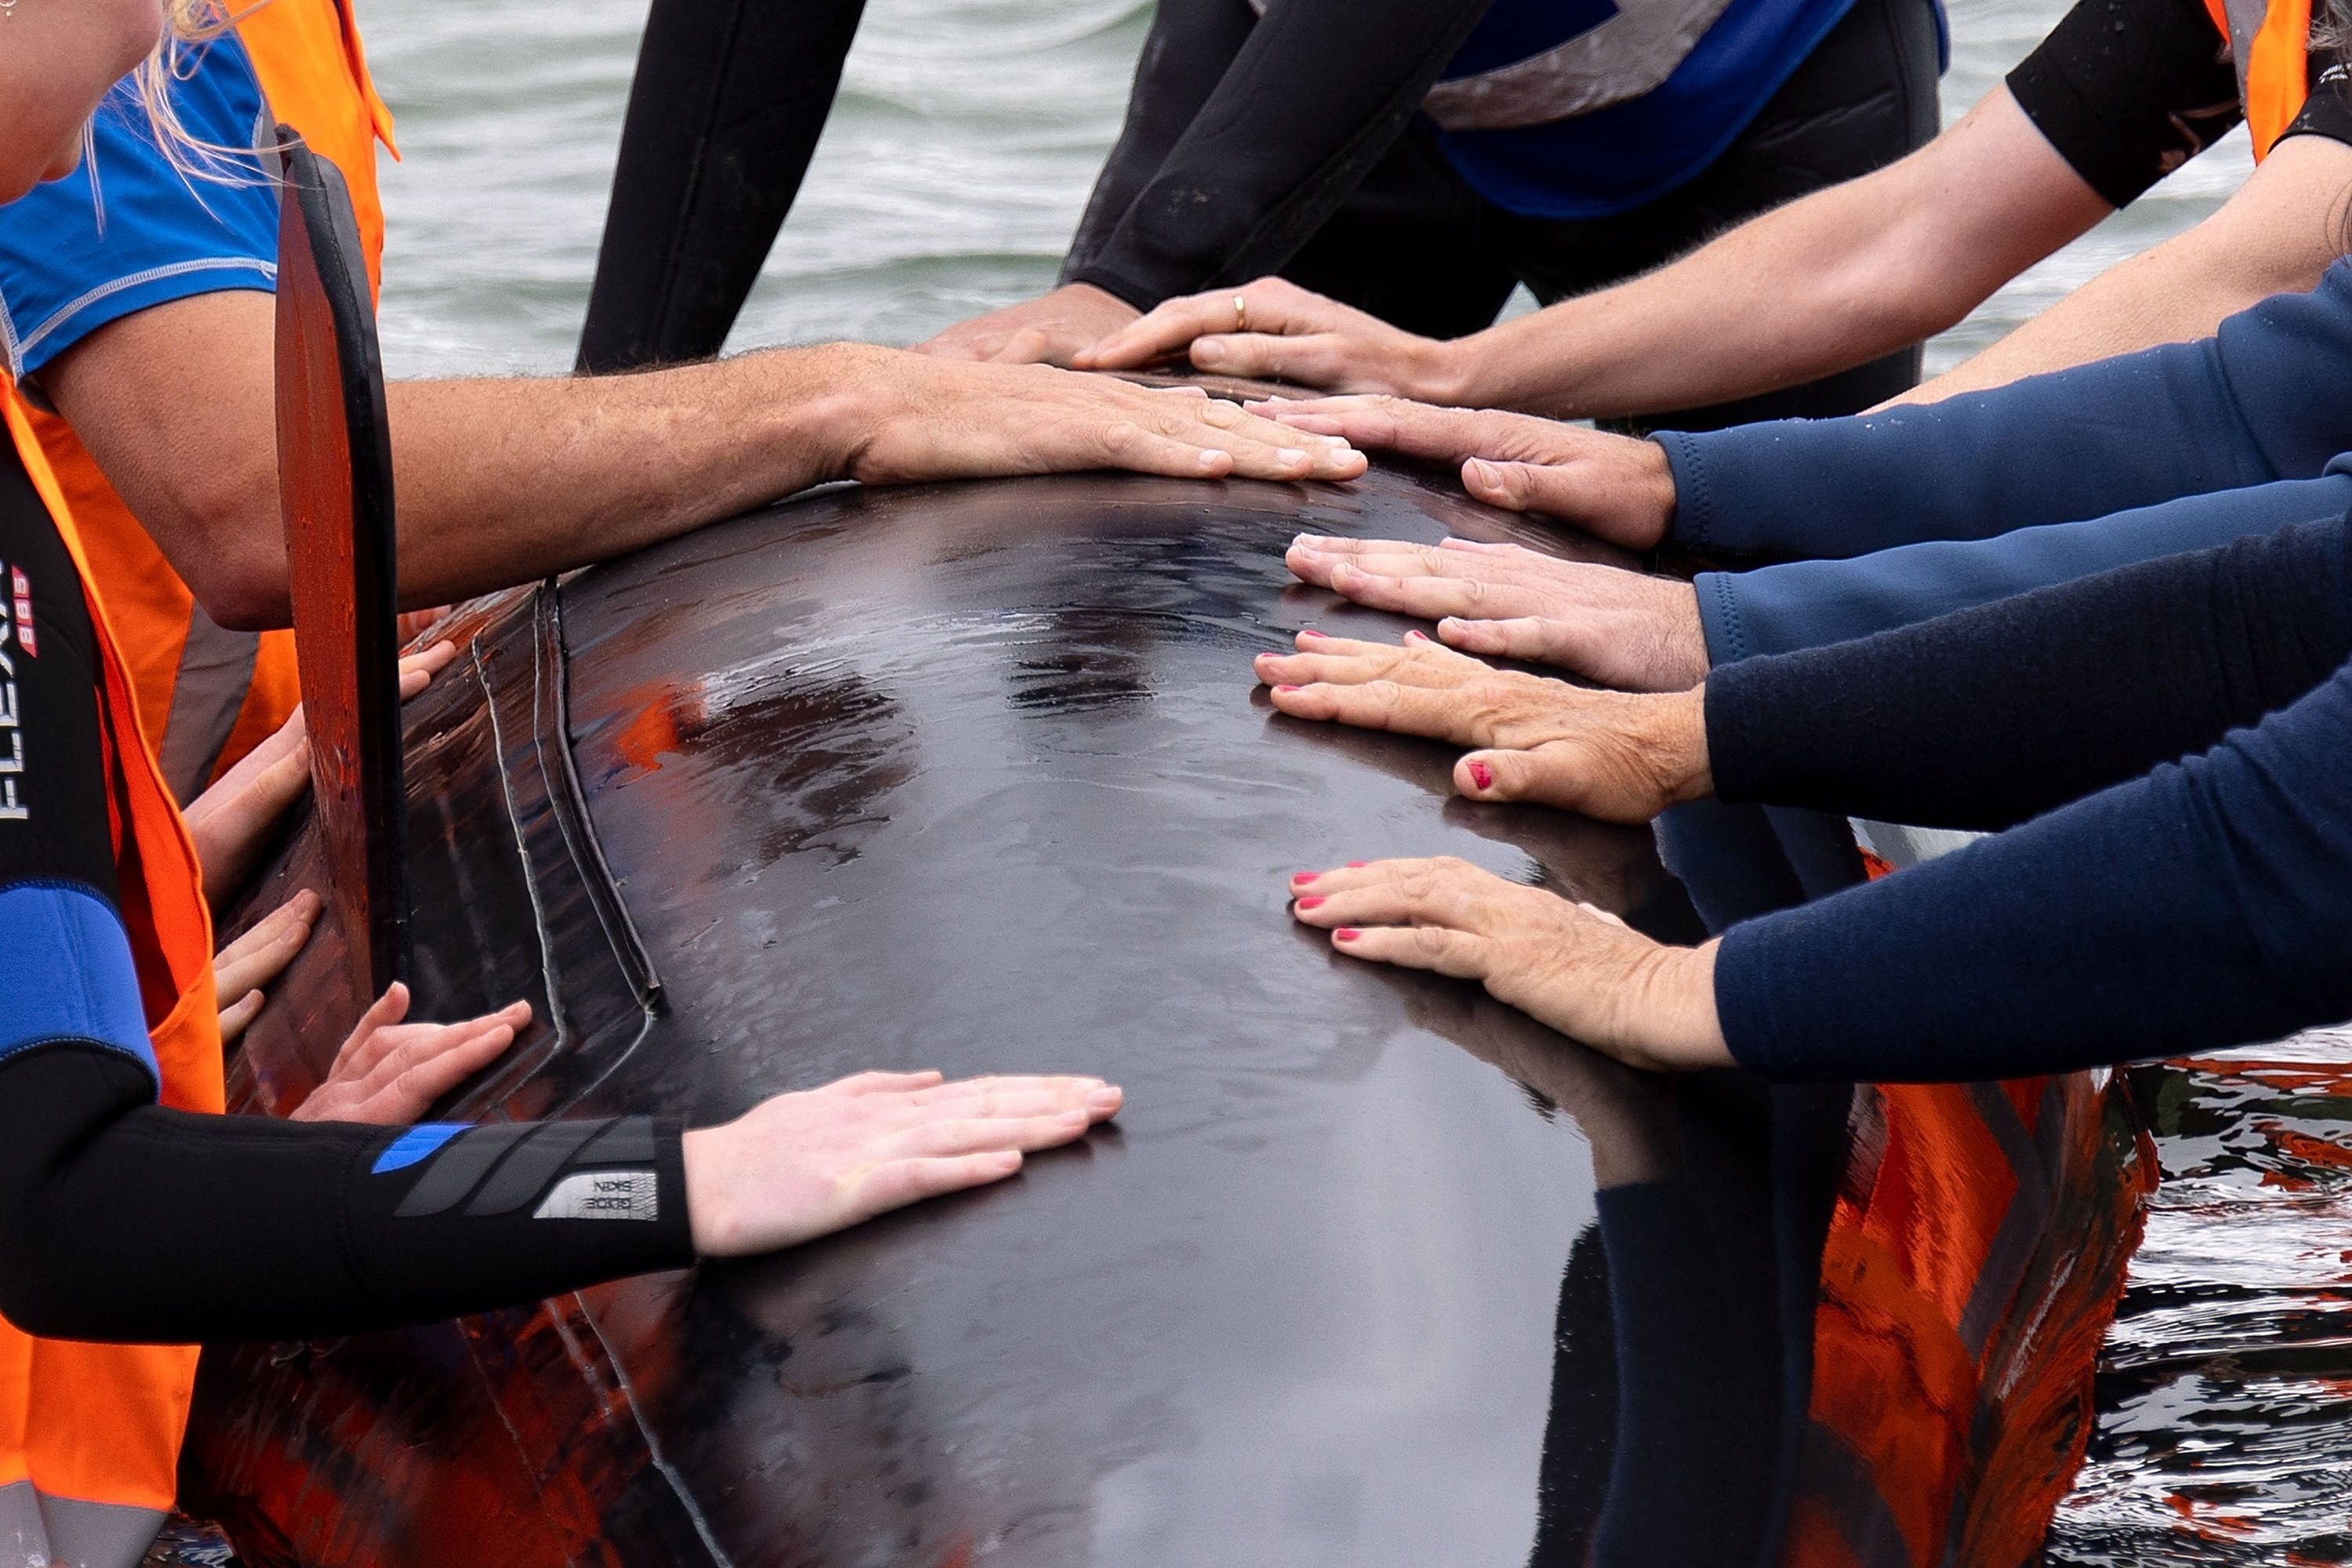 A group of volunteers from New Zealand whale rescue charity Project Jonah are taught how to save a stranded whale by a group instructor, at Scorching Bay in Wellington, Dec. 11, 2021.  (AFP Photo)